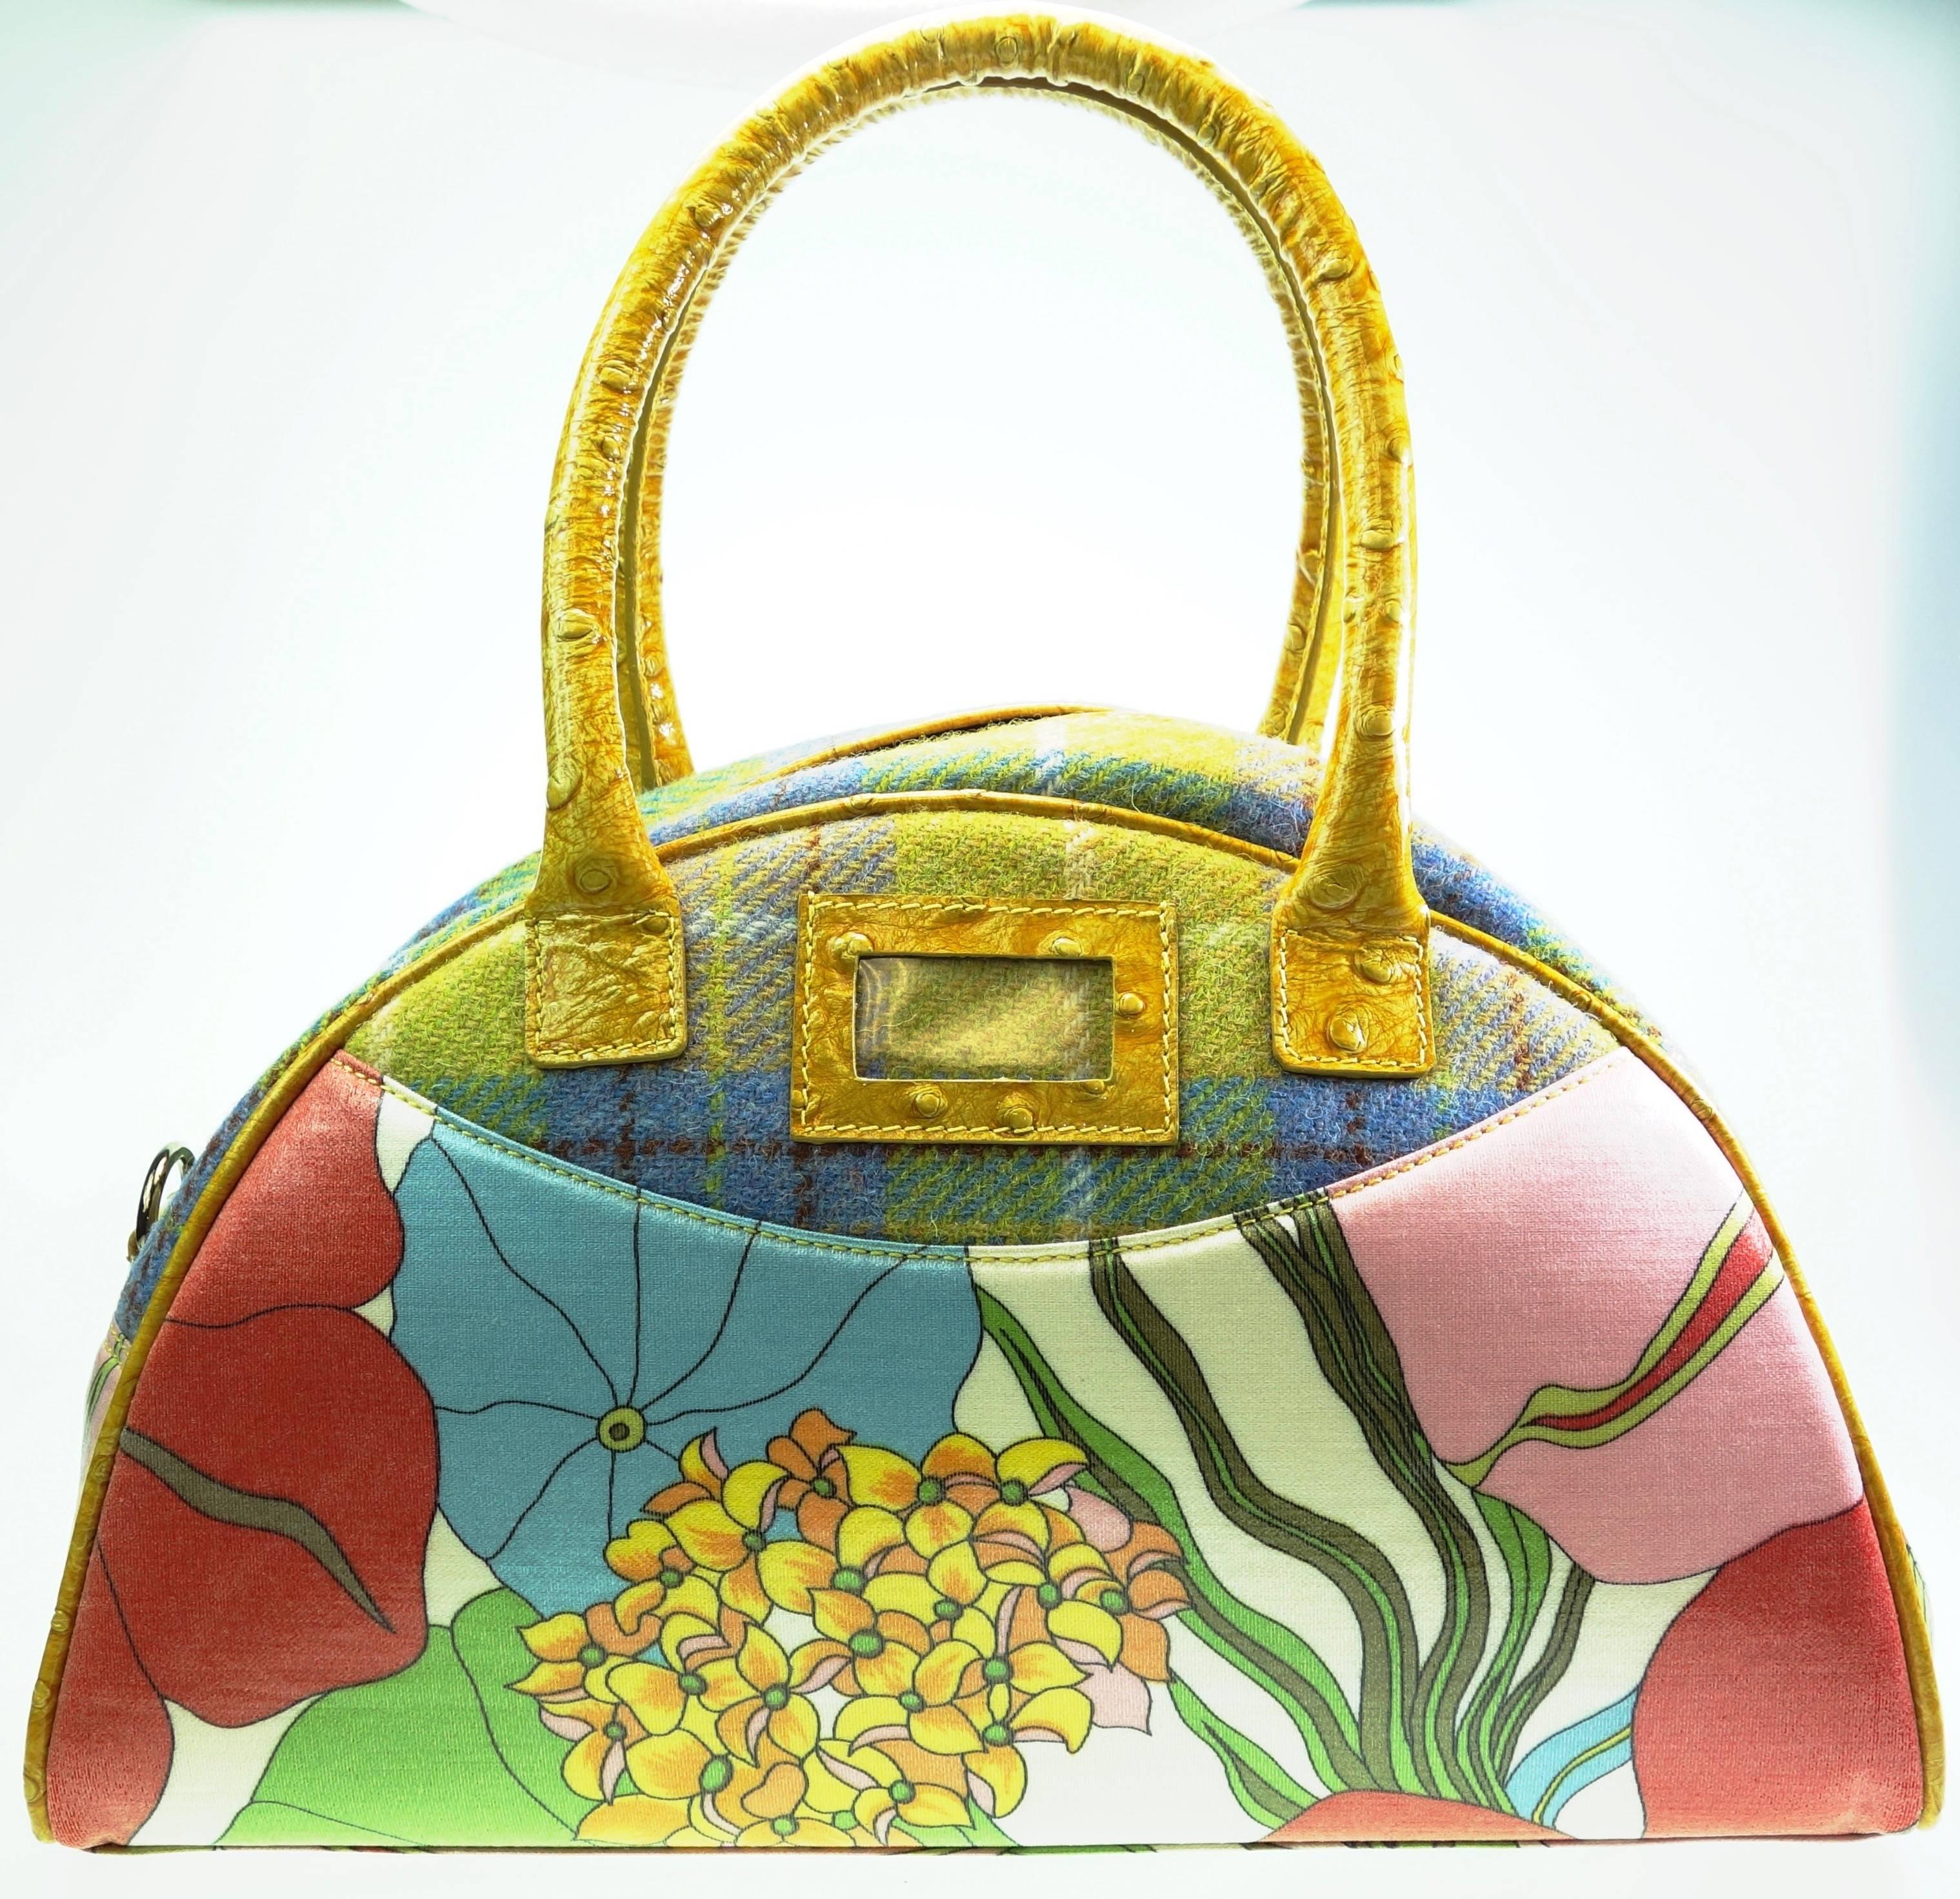 Colorful handbag from John Galliano. The composition of differnet materials and colors makes it very unique. The lower part of the bag is coated canvas, the top is tweed fabric. The handles and the removable strap is made of embossed lether with